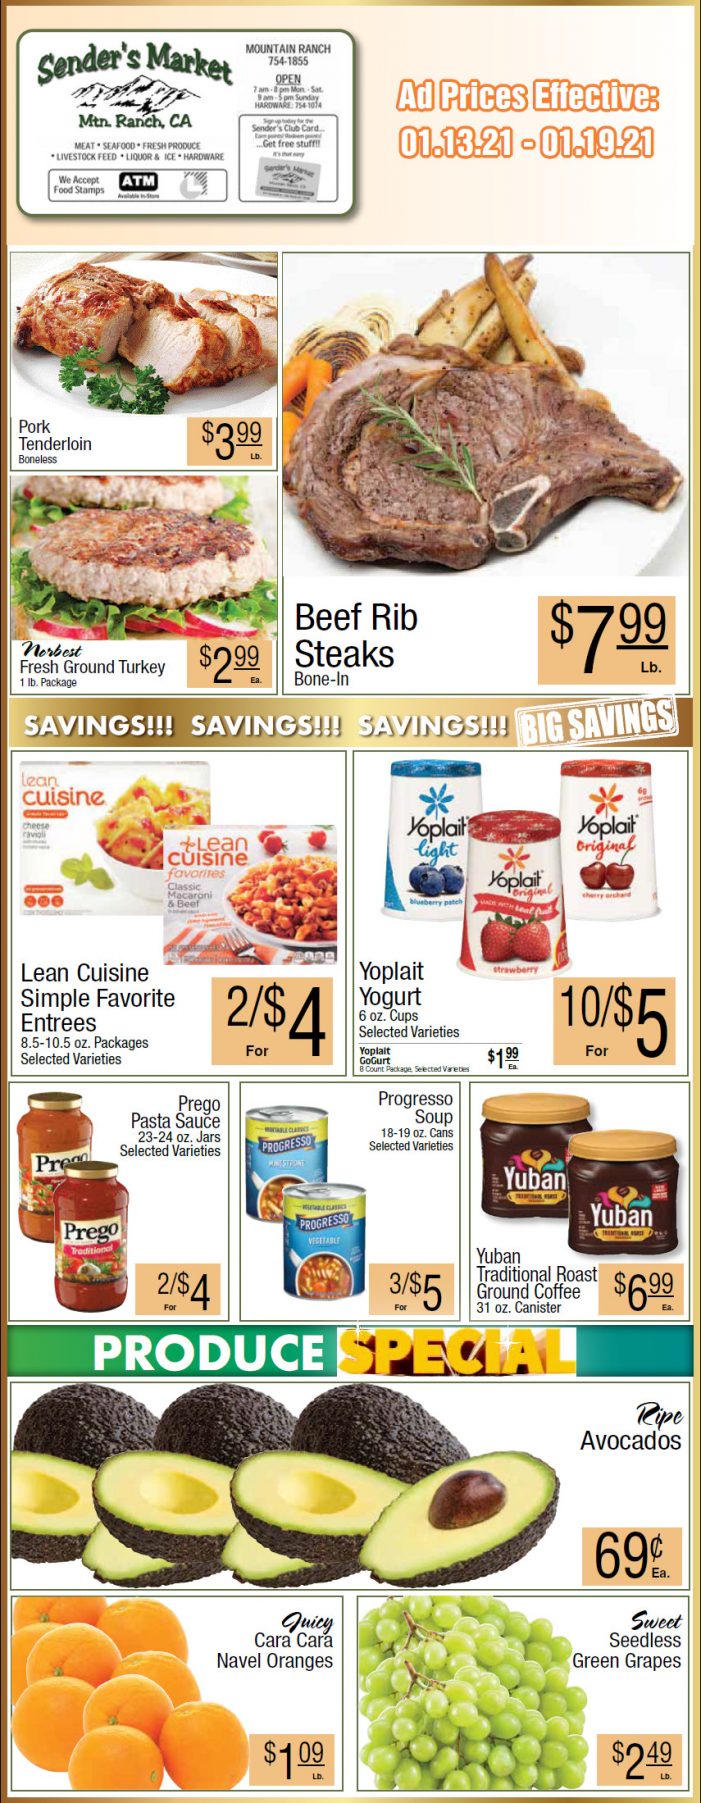 Sender’s Market’s Weekly Ad & Grocery Specials Through January 19th!  Shop Local & Save!